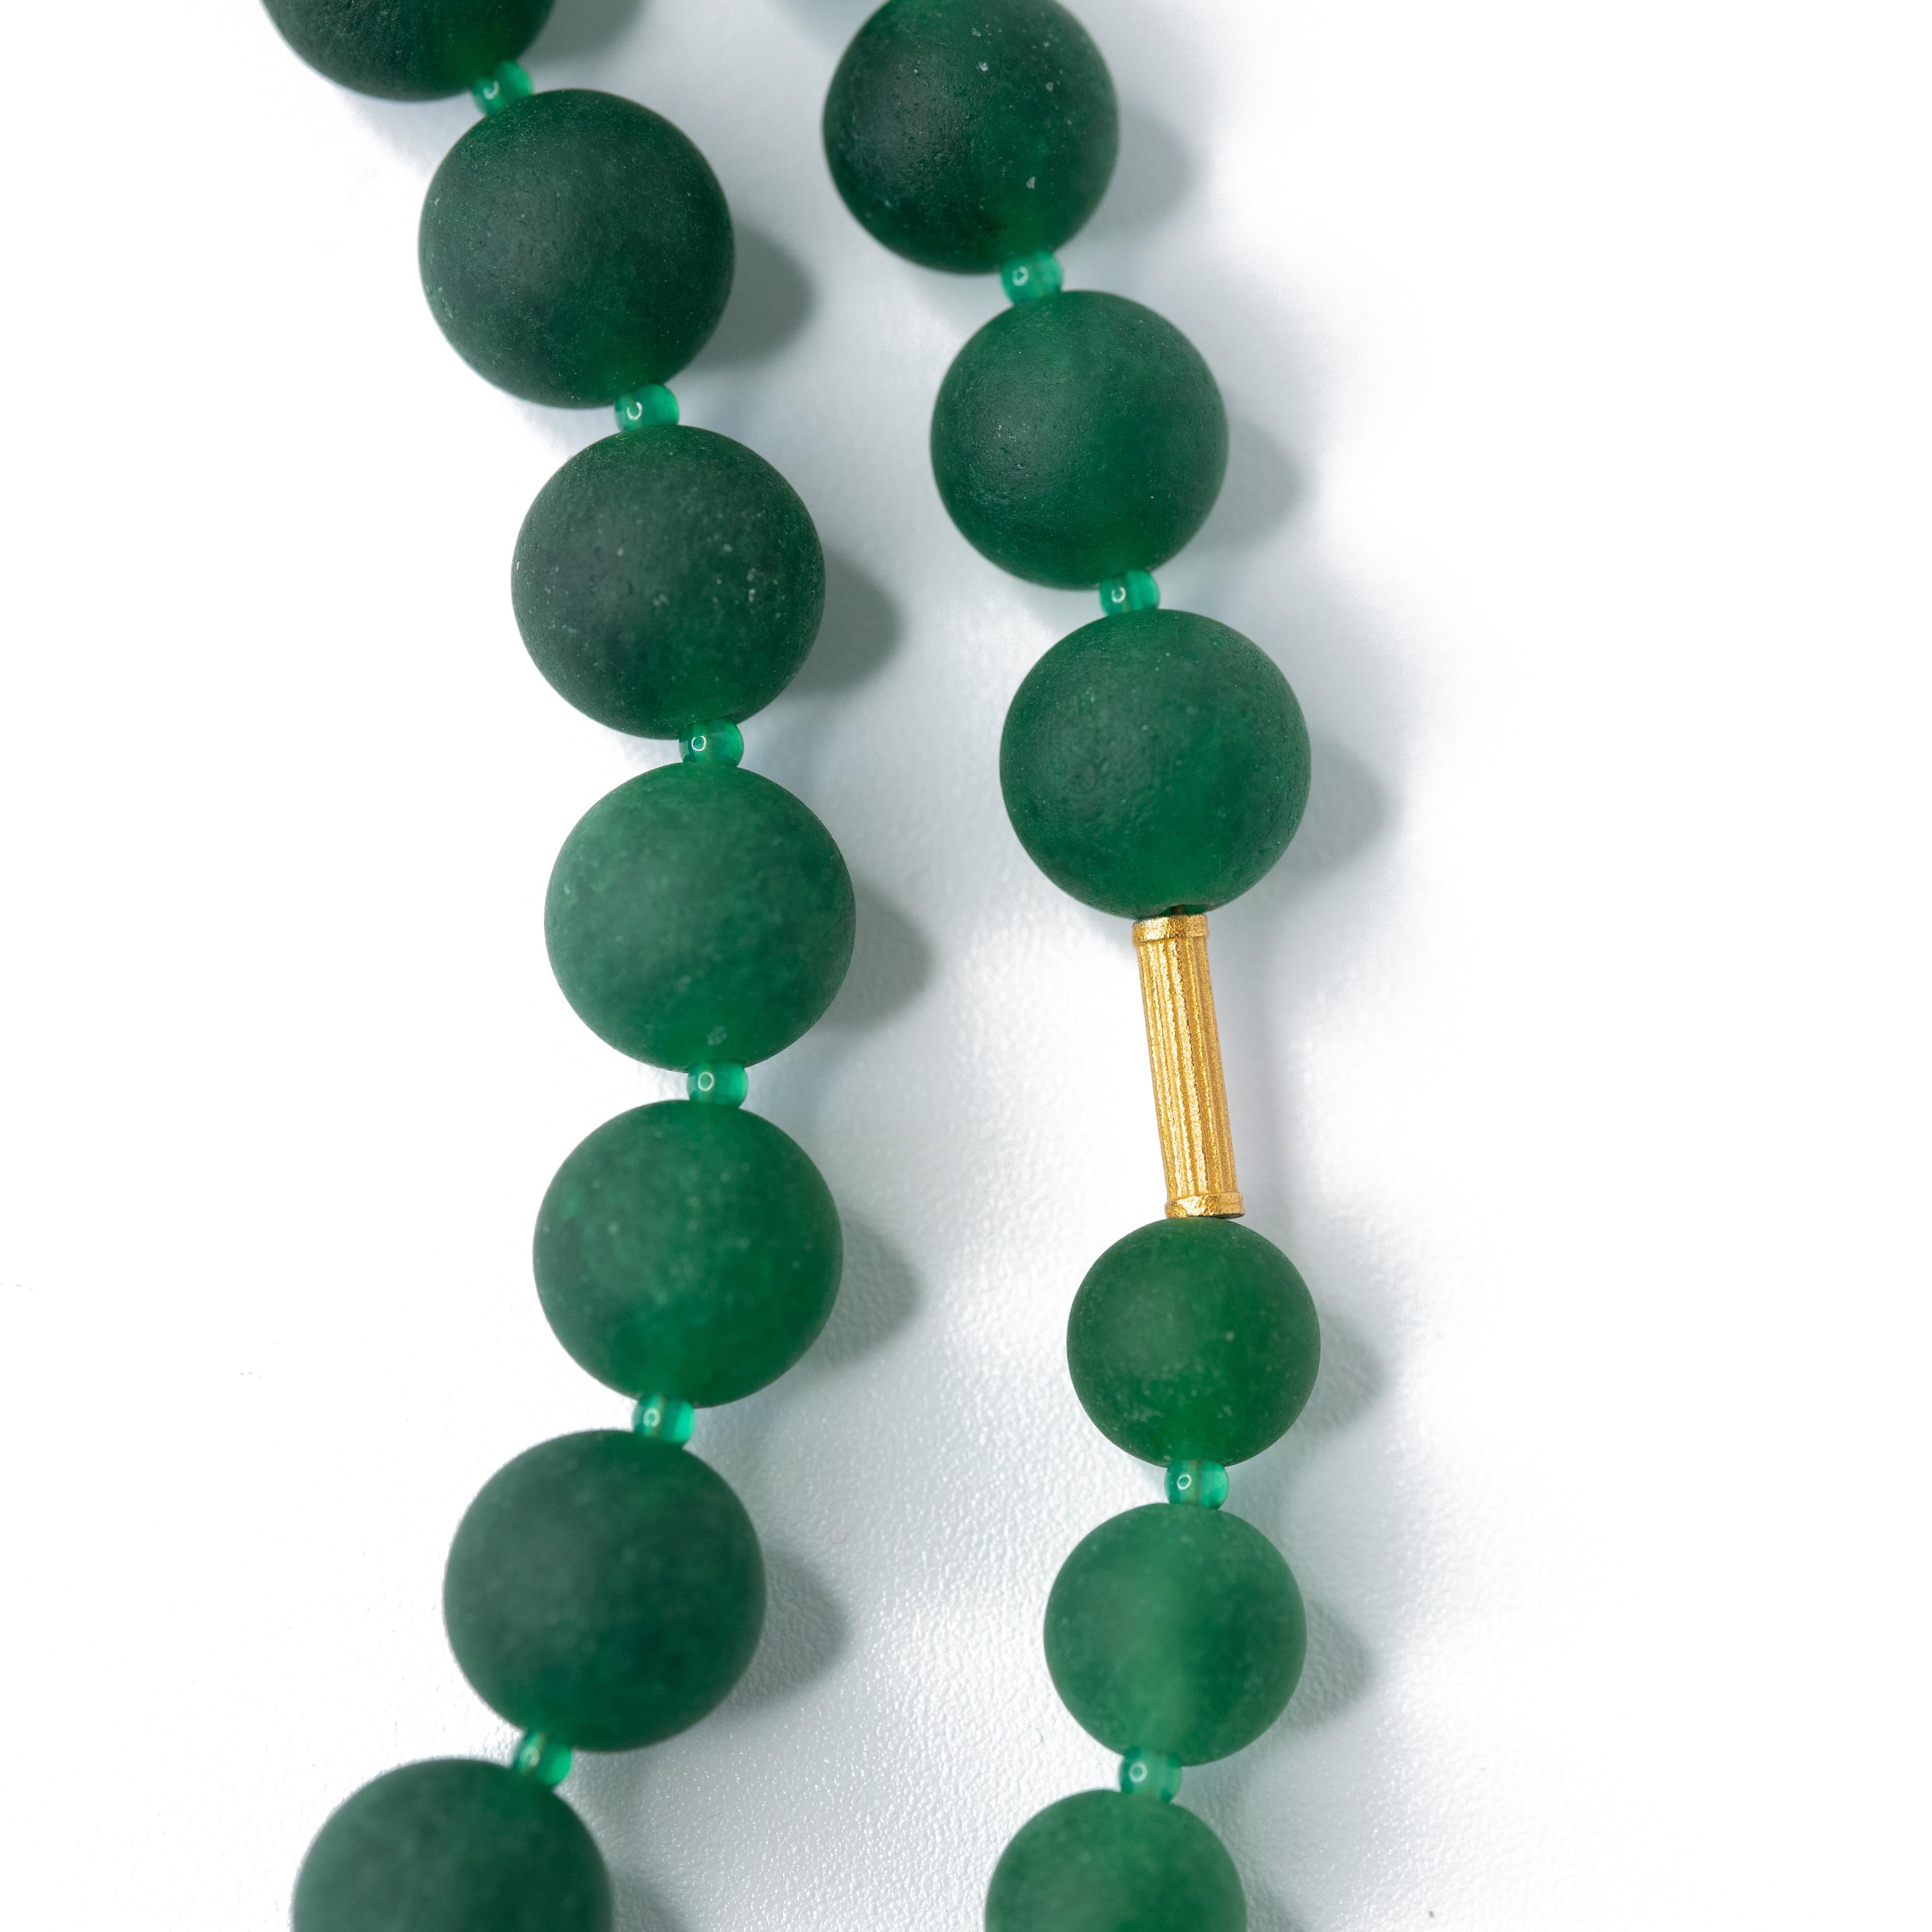 Artisan Green Chalcedony Beads and Gold Necklace -The Poet's Garden by Bombyx House For Sale